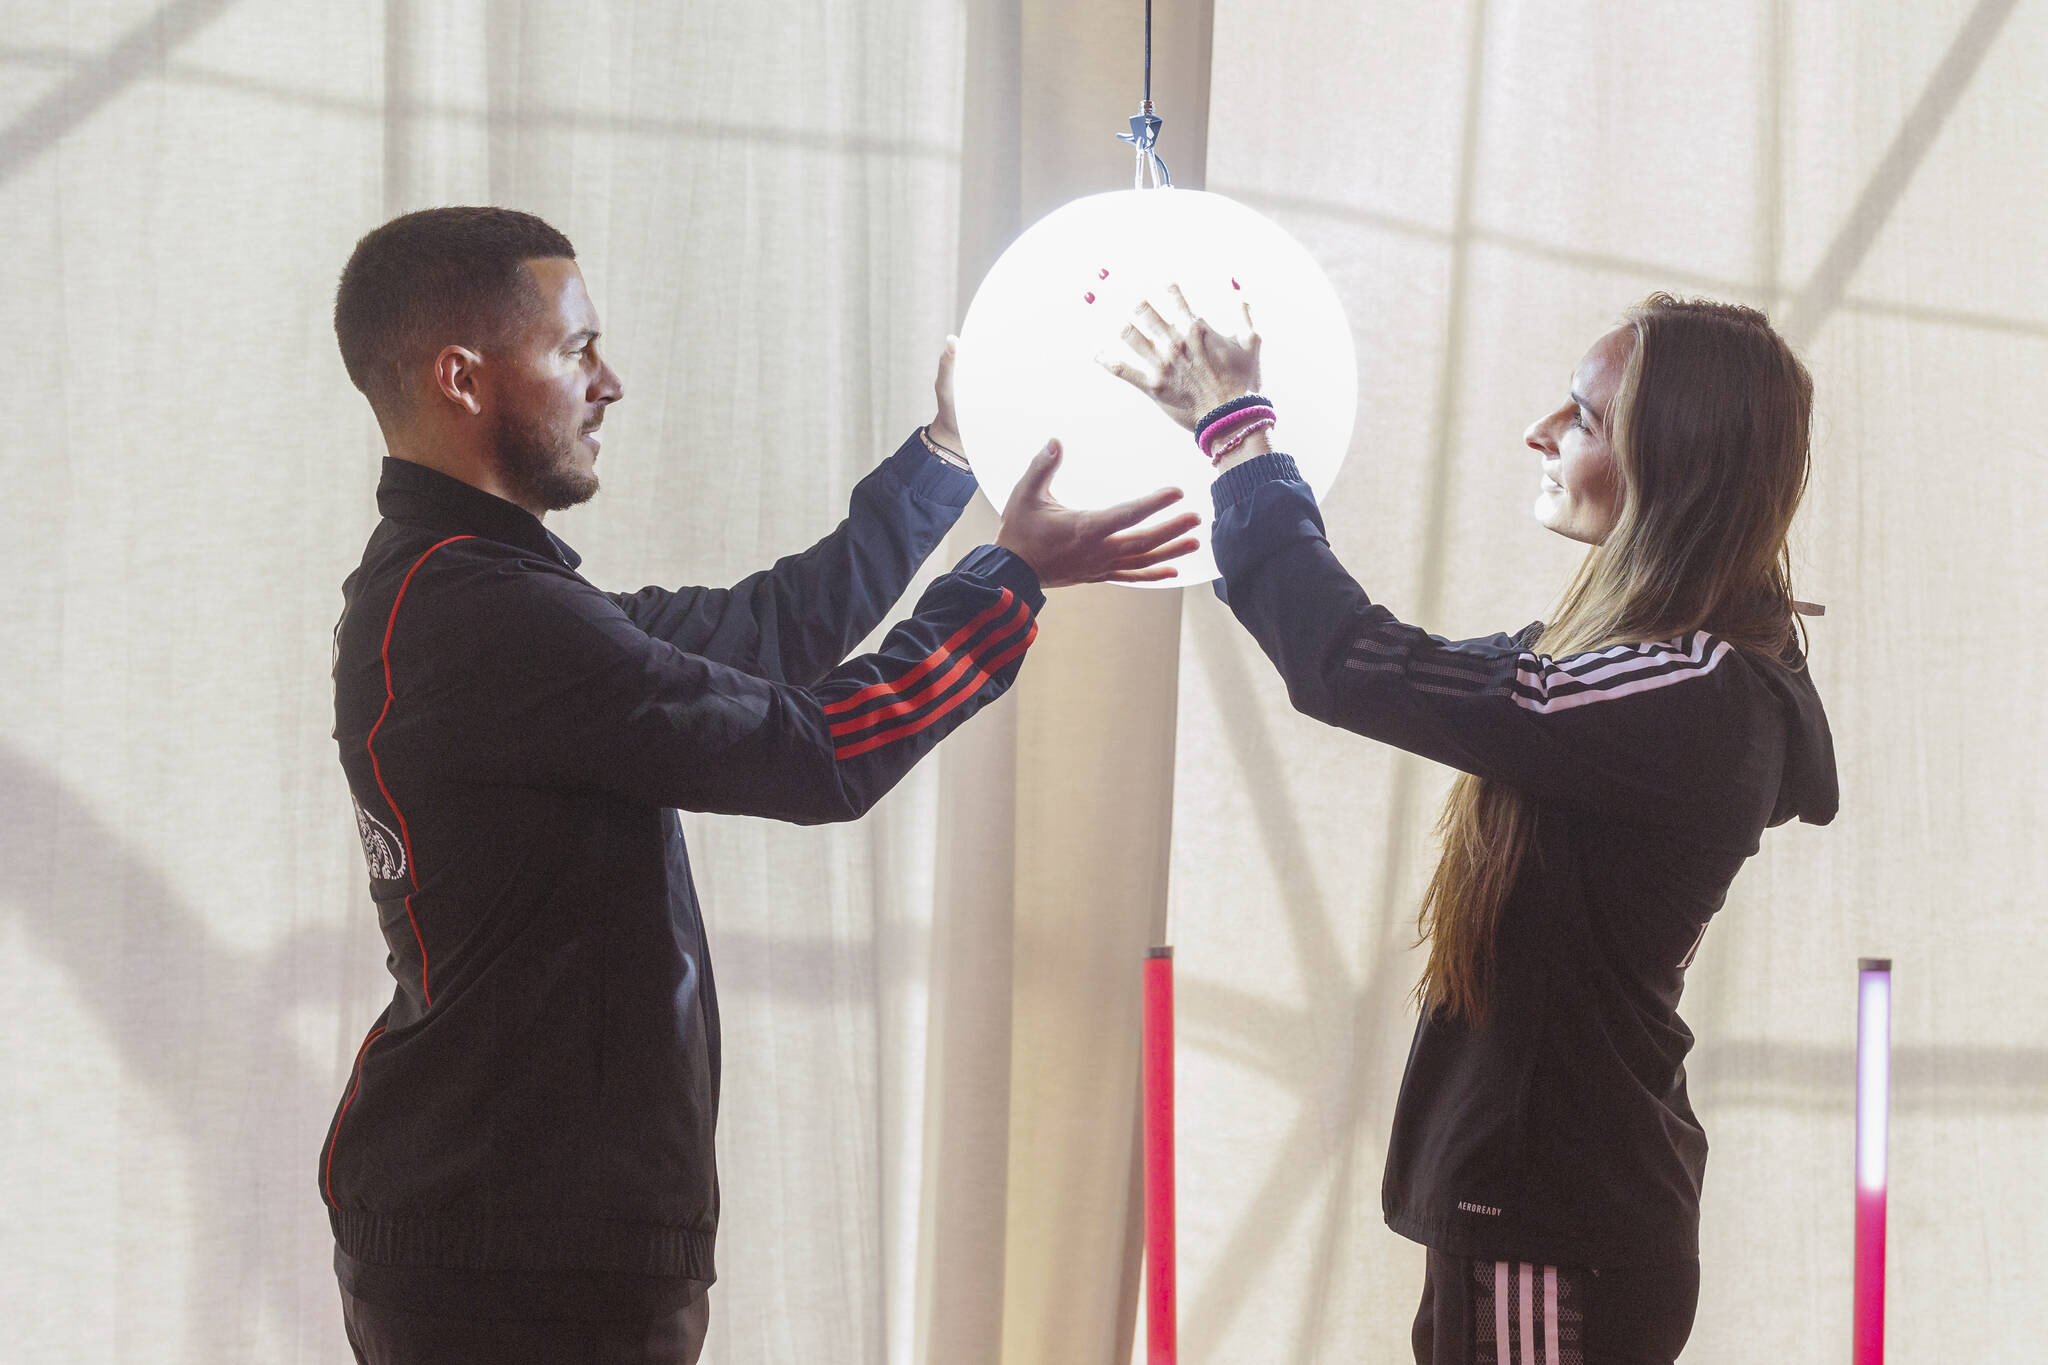 Eden Hazard, left, and Tessa Wullaert, captains of the Belgian men’s and women’s national soccer teams, hold a globe during a farewell ceremony for the Red Devils, the men’s soccer team, at the airport in Brussels, Belgium, Tuesday, Nov. 15, 2022. The Belgian team leaves for Kuwait where it will play a friendly match on Friday against Egypt and then fly onto Qatar to participate in the World Cup. (AP Photo/Olivier Matthys)